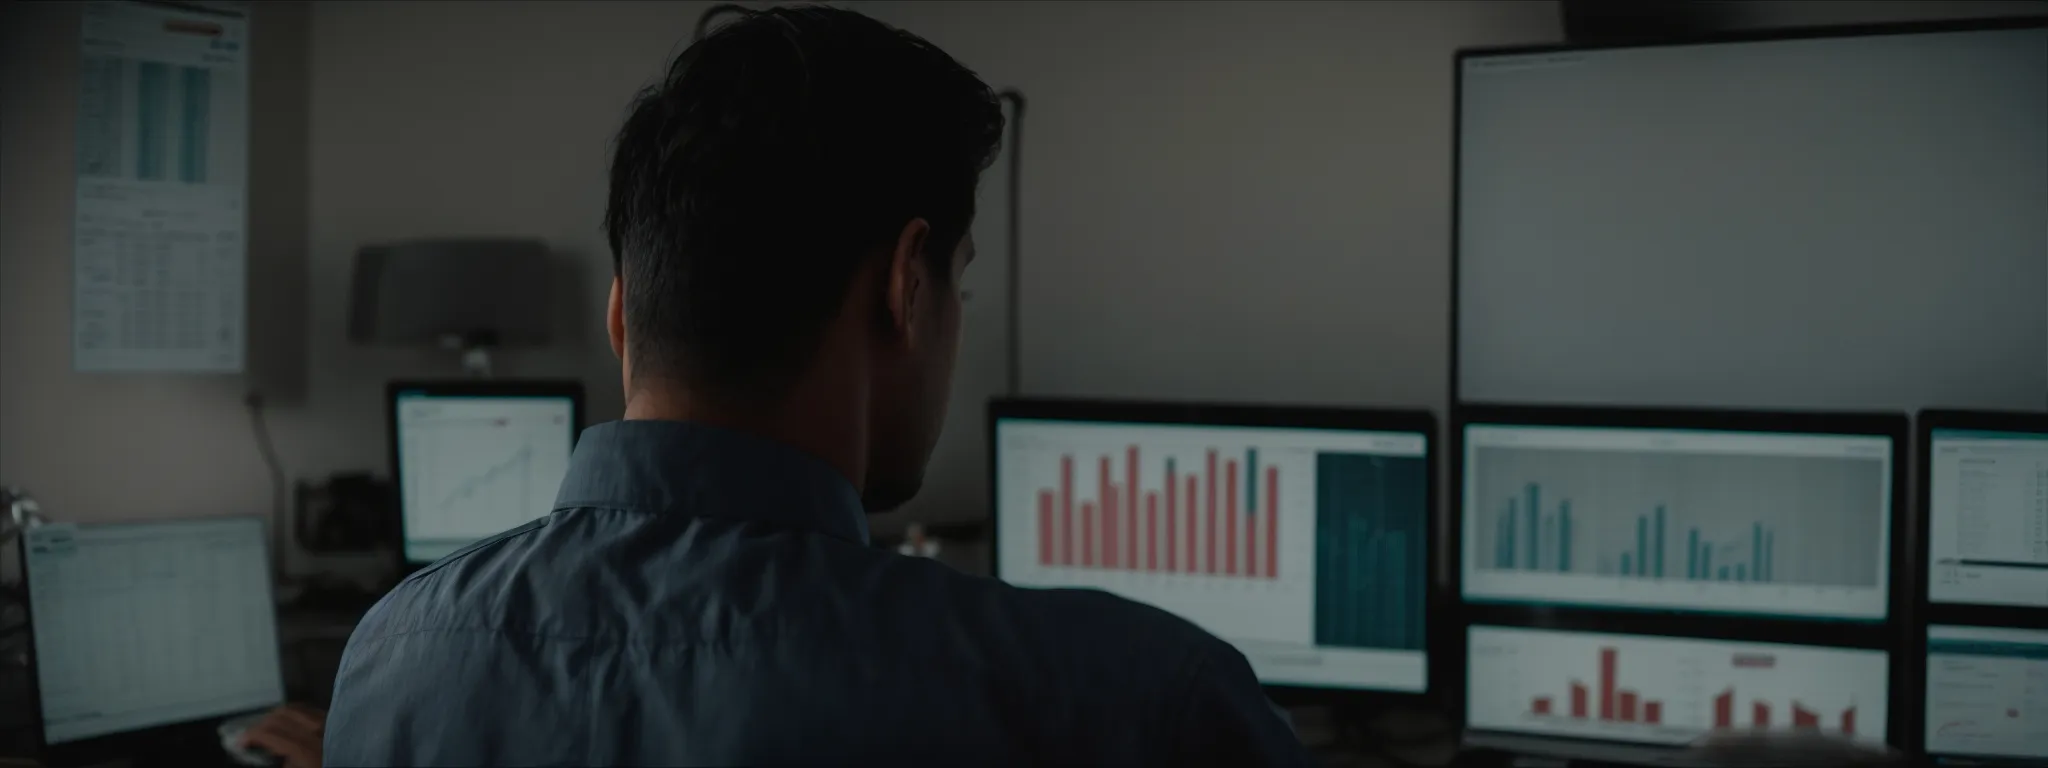 a focused individual scrutinizing graphs and charts on a computer screen in a well-lit office.